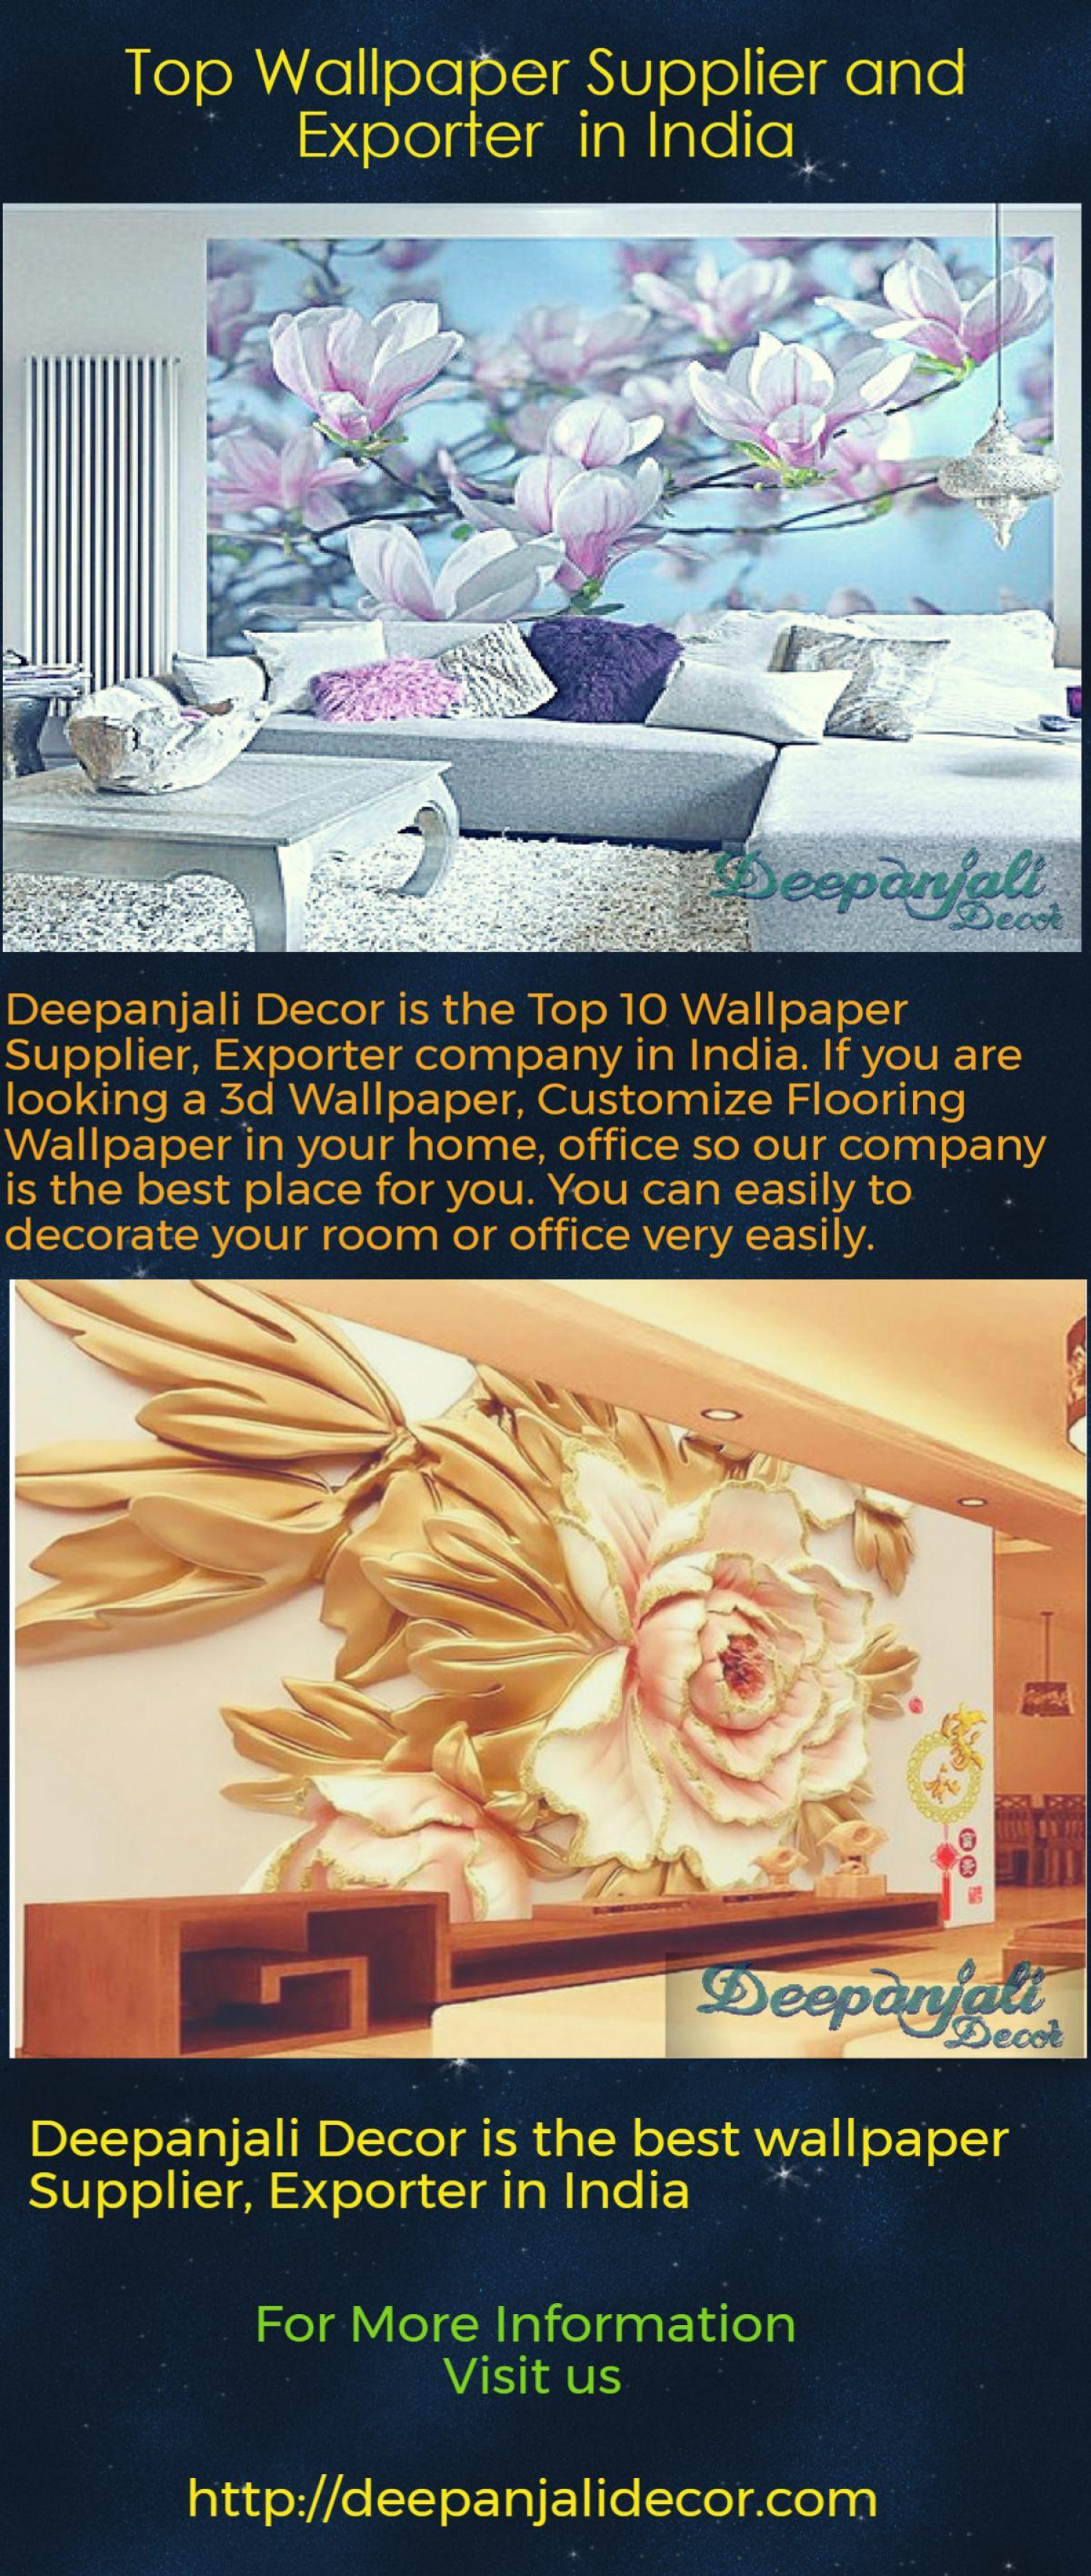 Best Wallpaper Supplier and Exporter Company in India - Deepanjali Decor Infographic